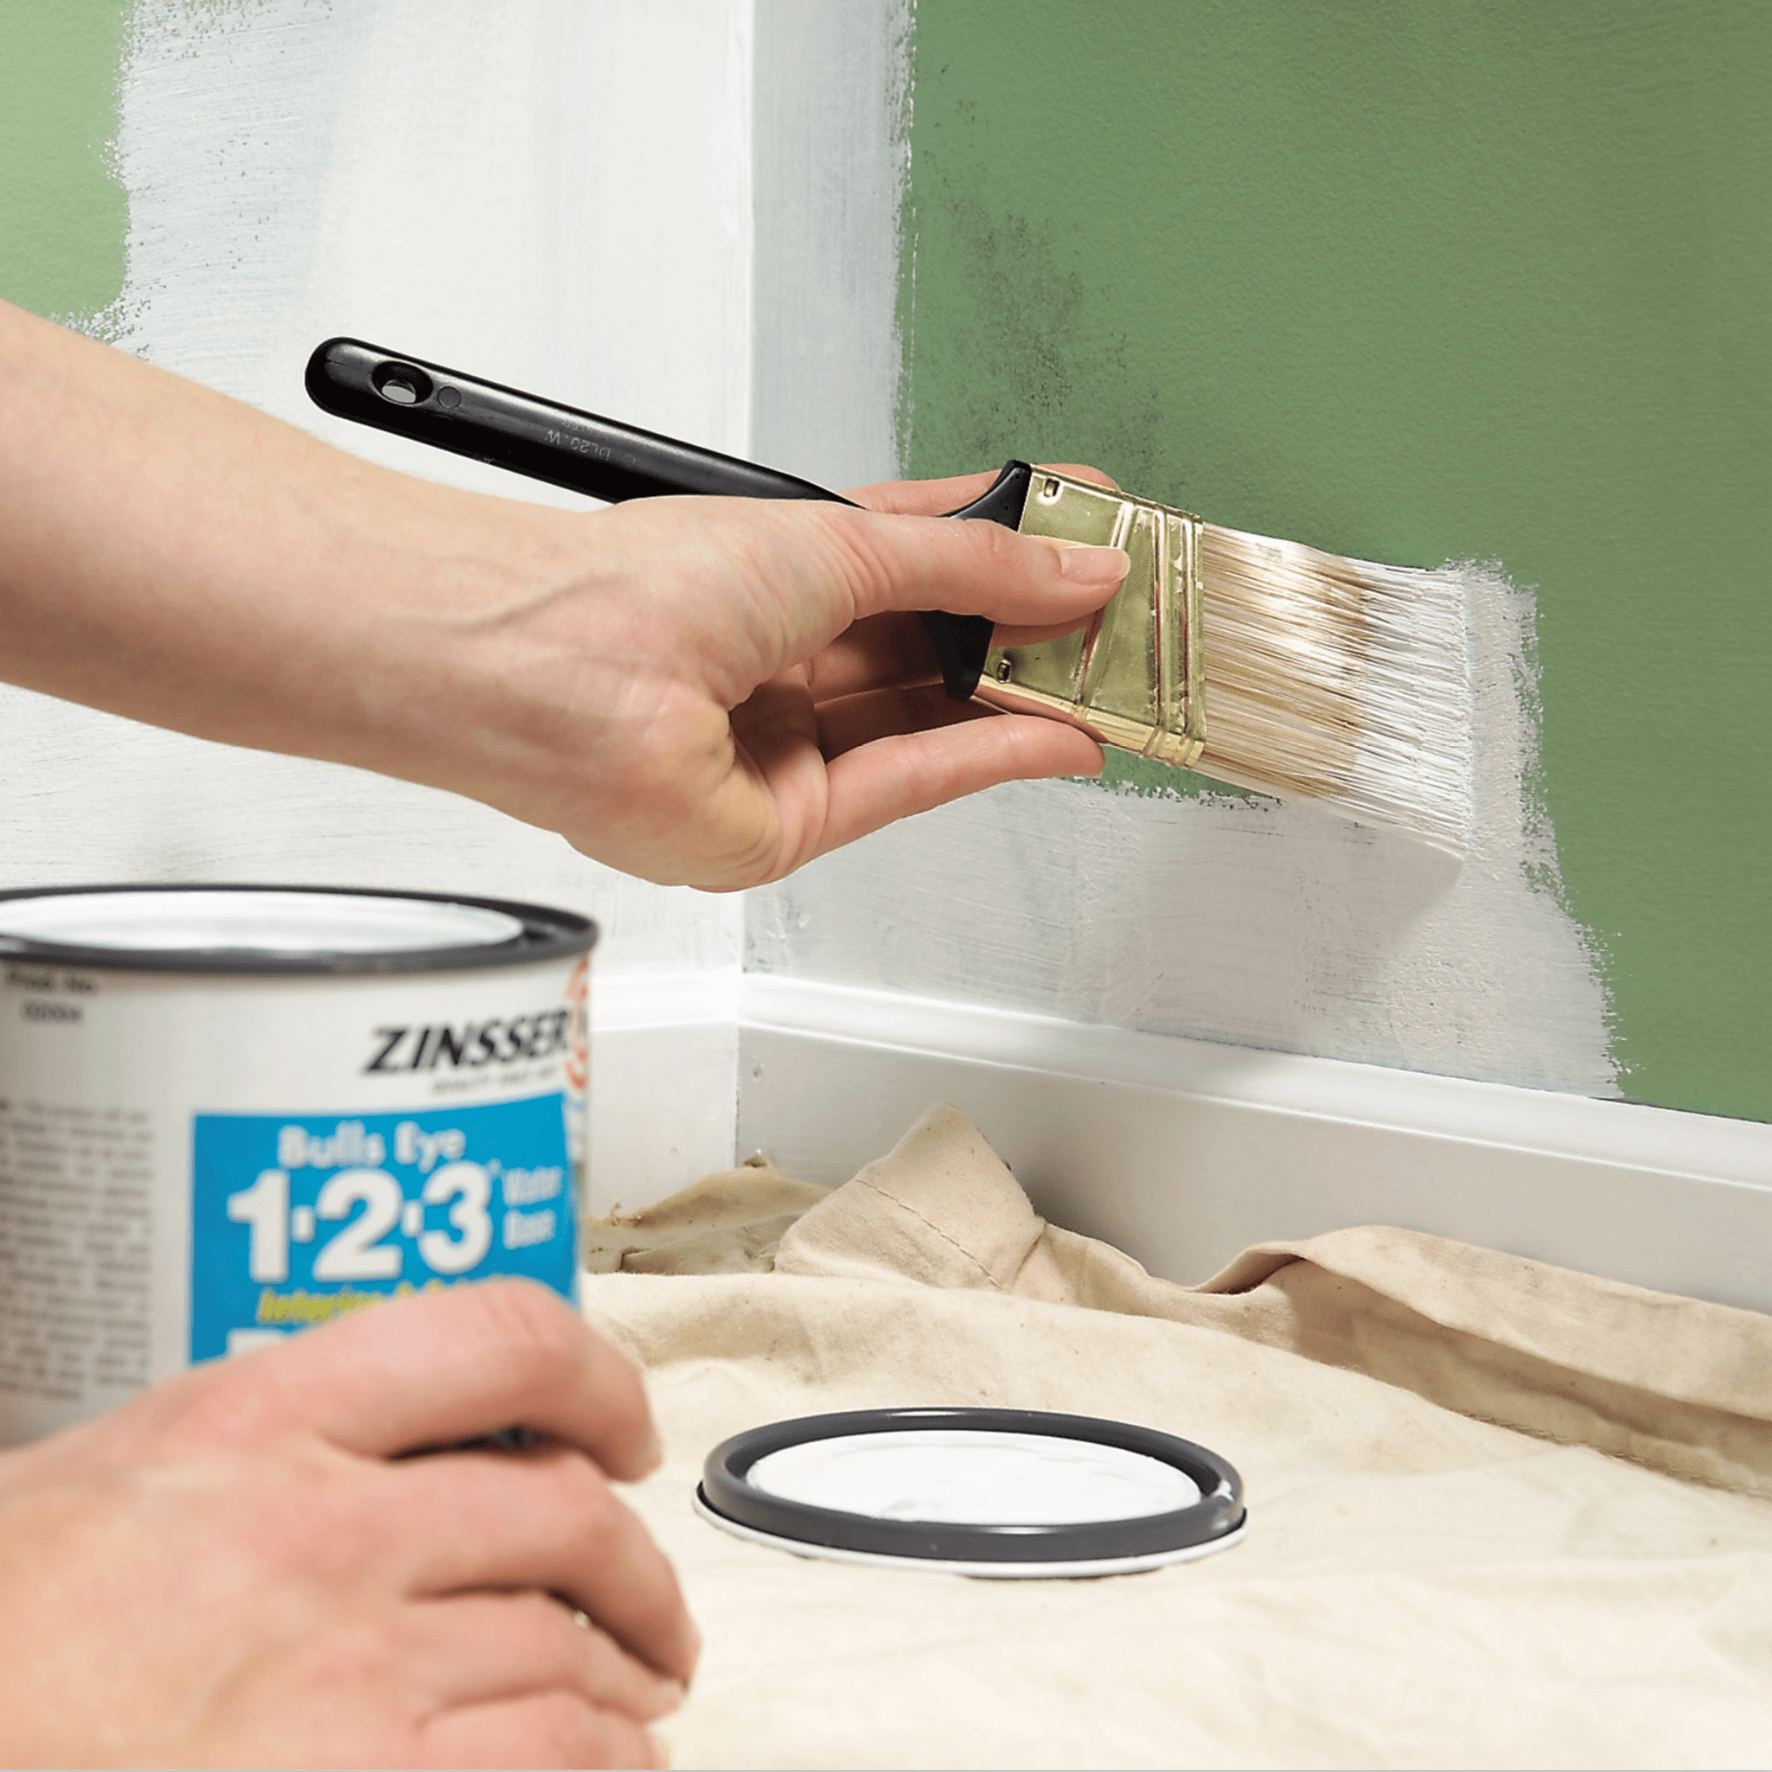 What Does Paint Primer Do?